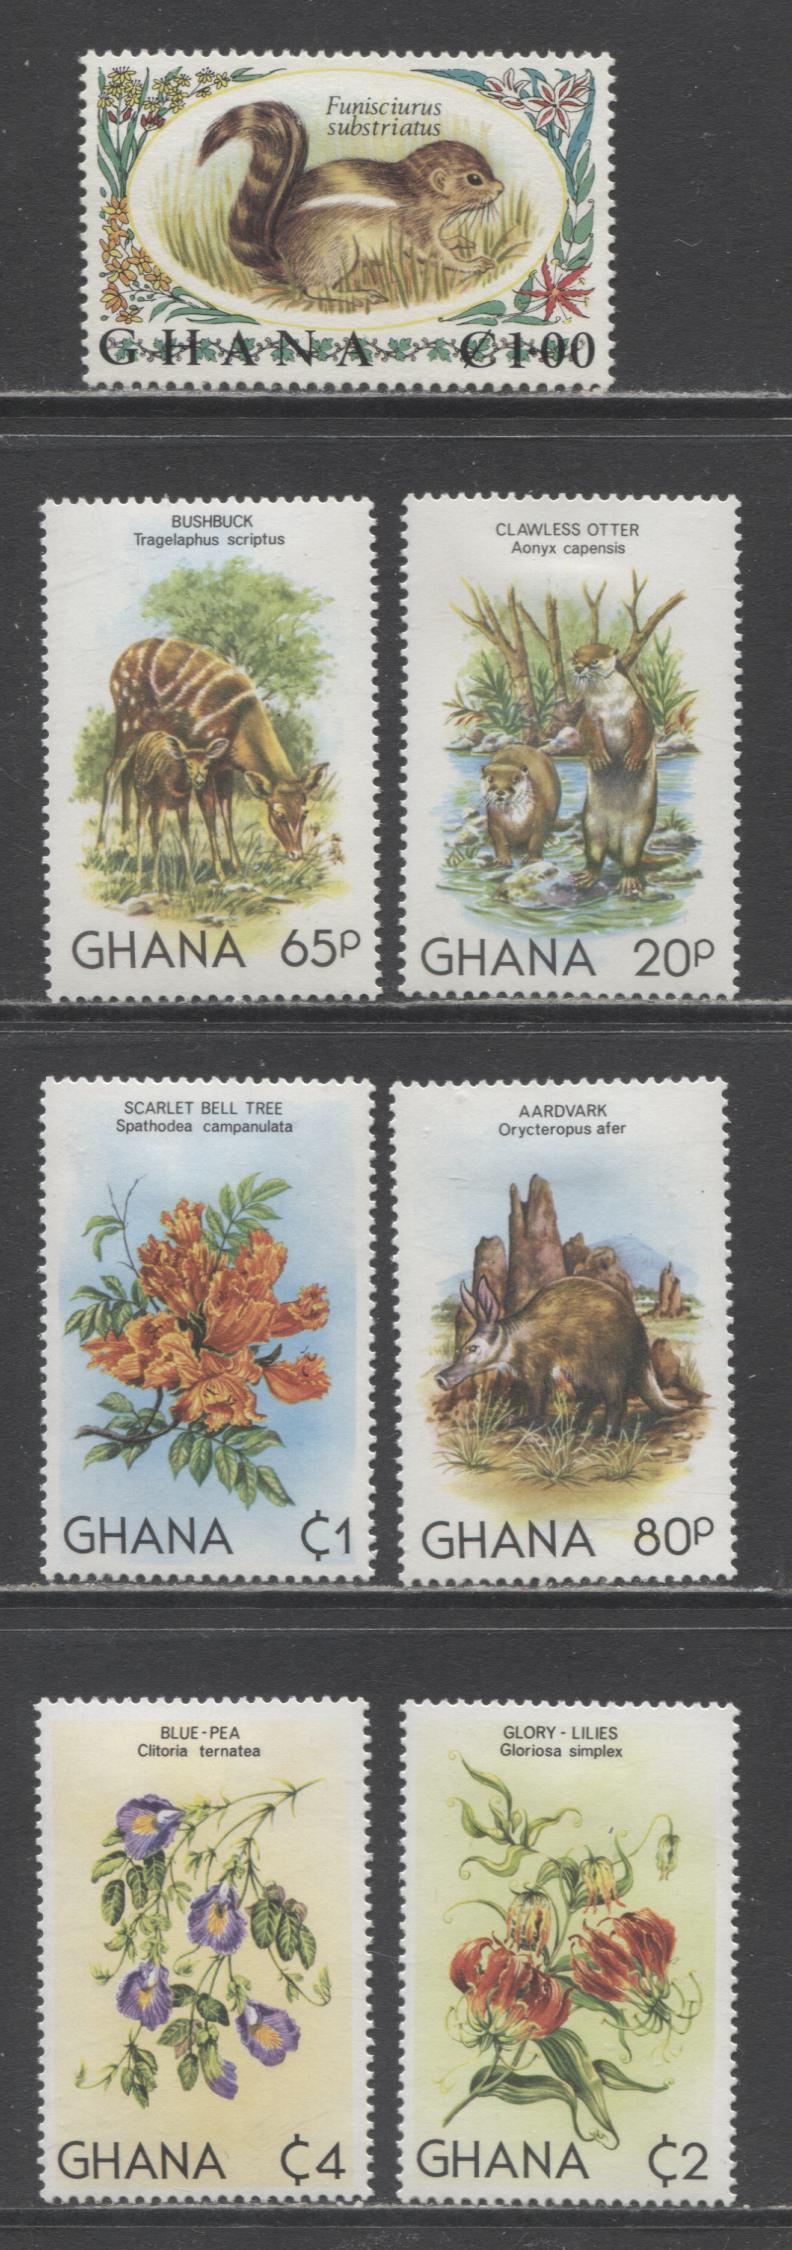 Lot 8 Ghana SC#453/787 1972-1982 Wildlife Issues, 7 VFOG Singles, Click on Listing to See ALL Pictures, 2017 Scott Cat. $12.15